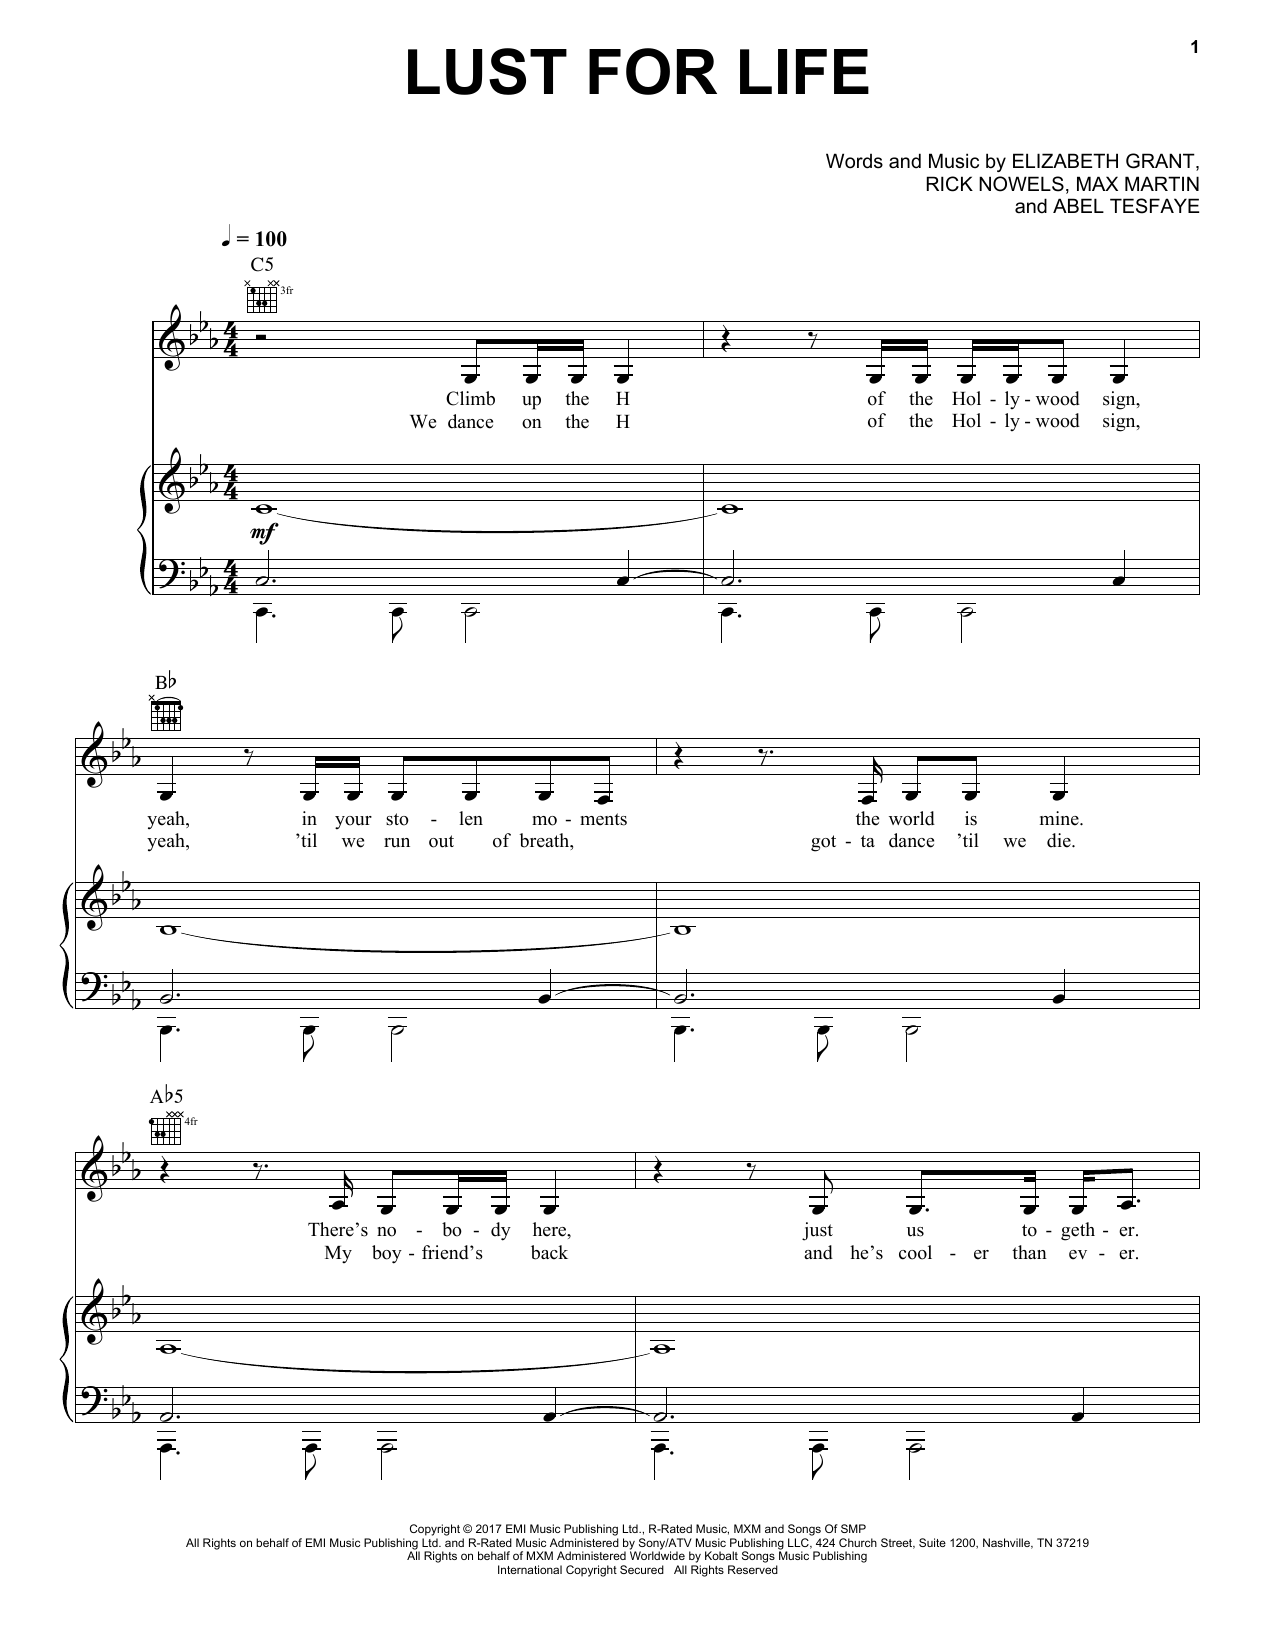 Download Lana Del Rey Lust For Life (feat. The Weeknd) Sheet Music